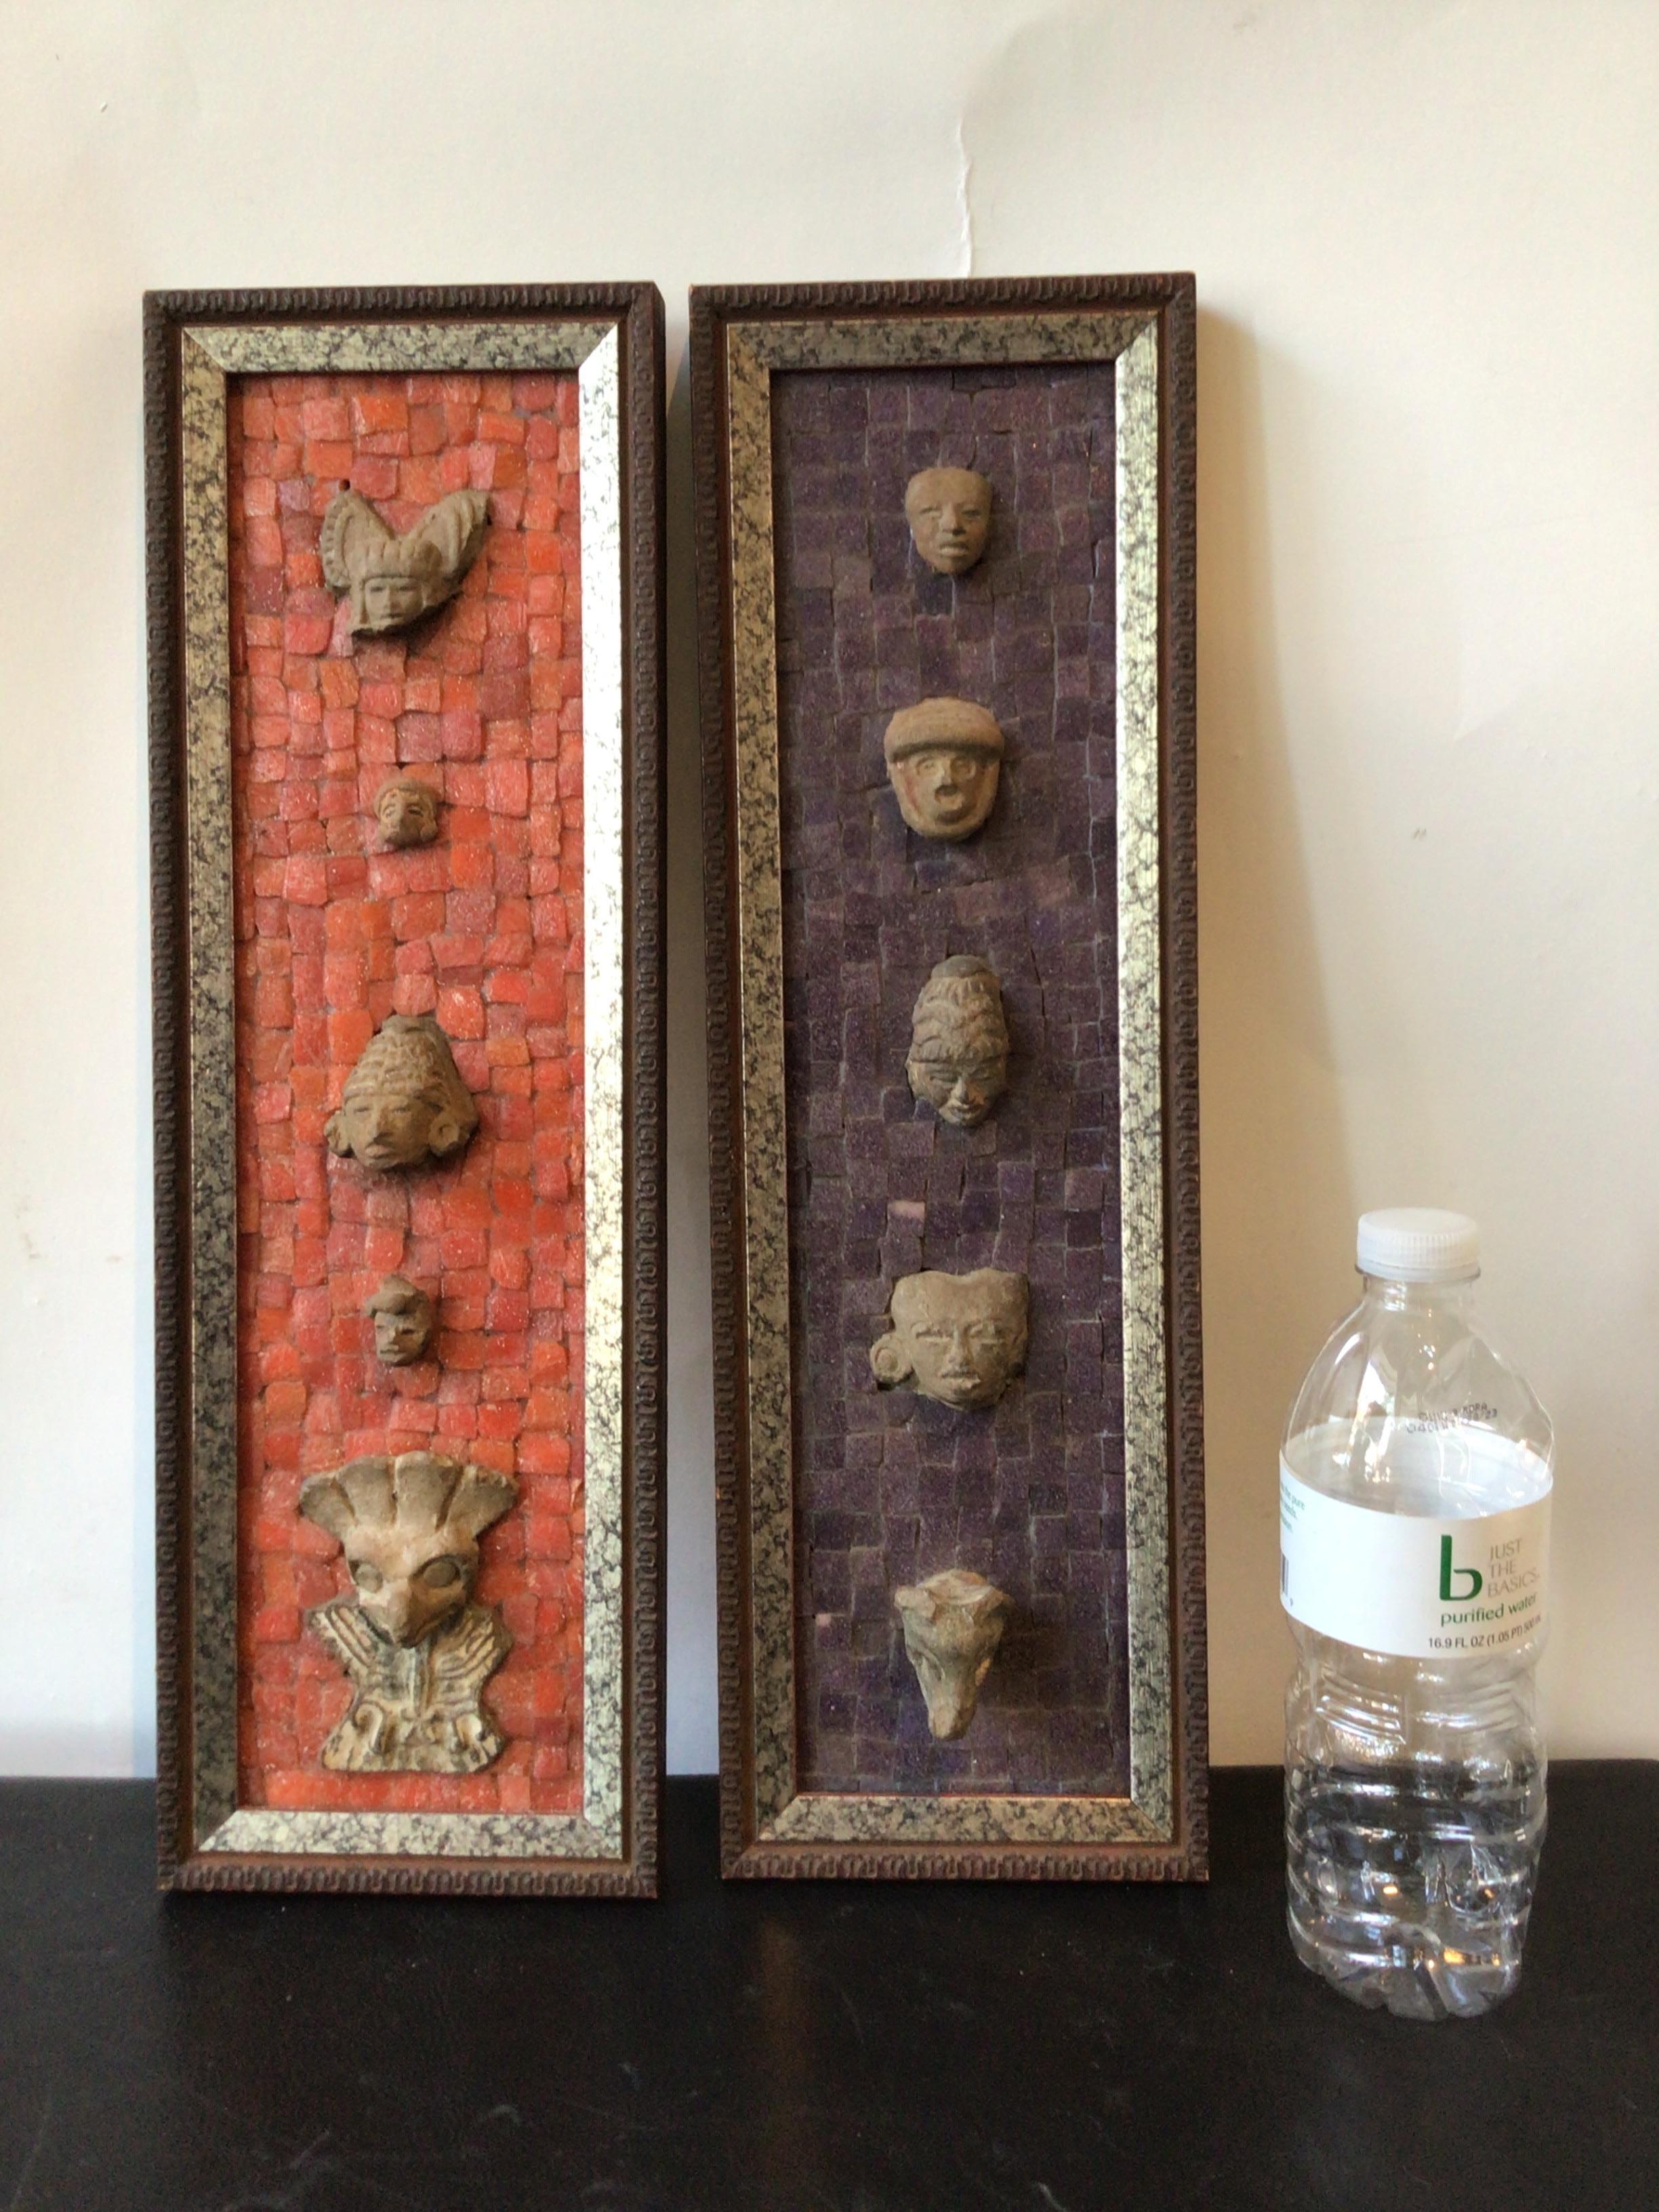 Pair of framed pre Colombian artifacts on tile backed boards.